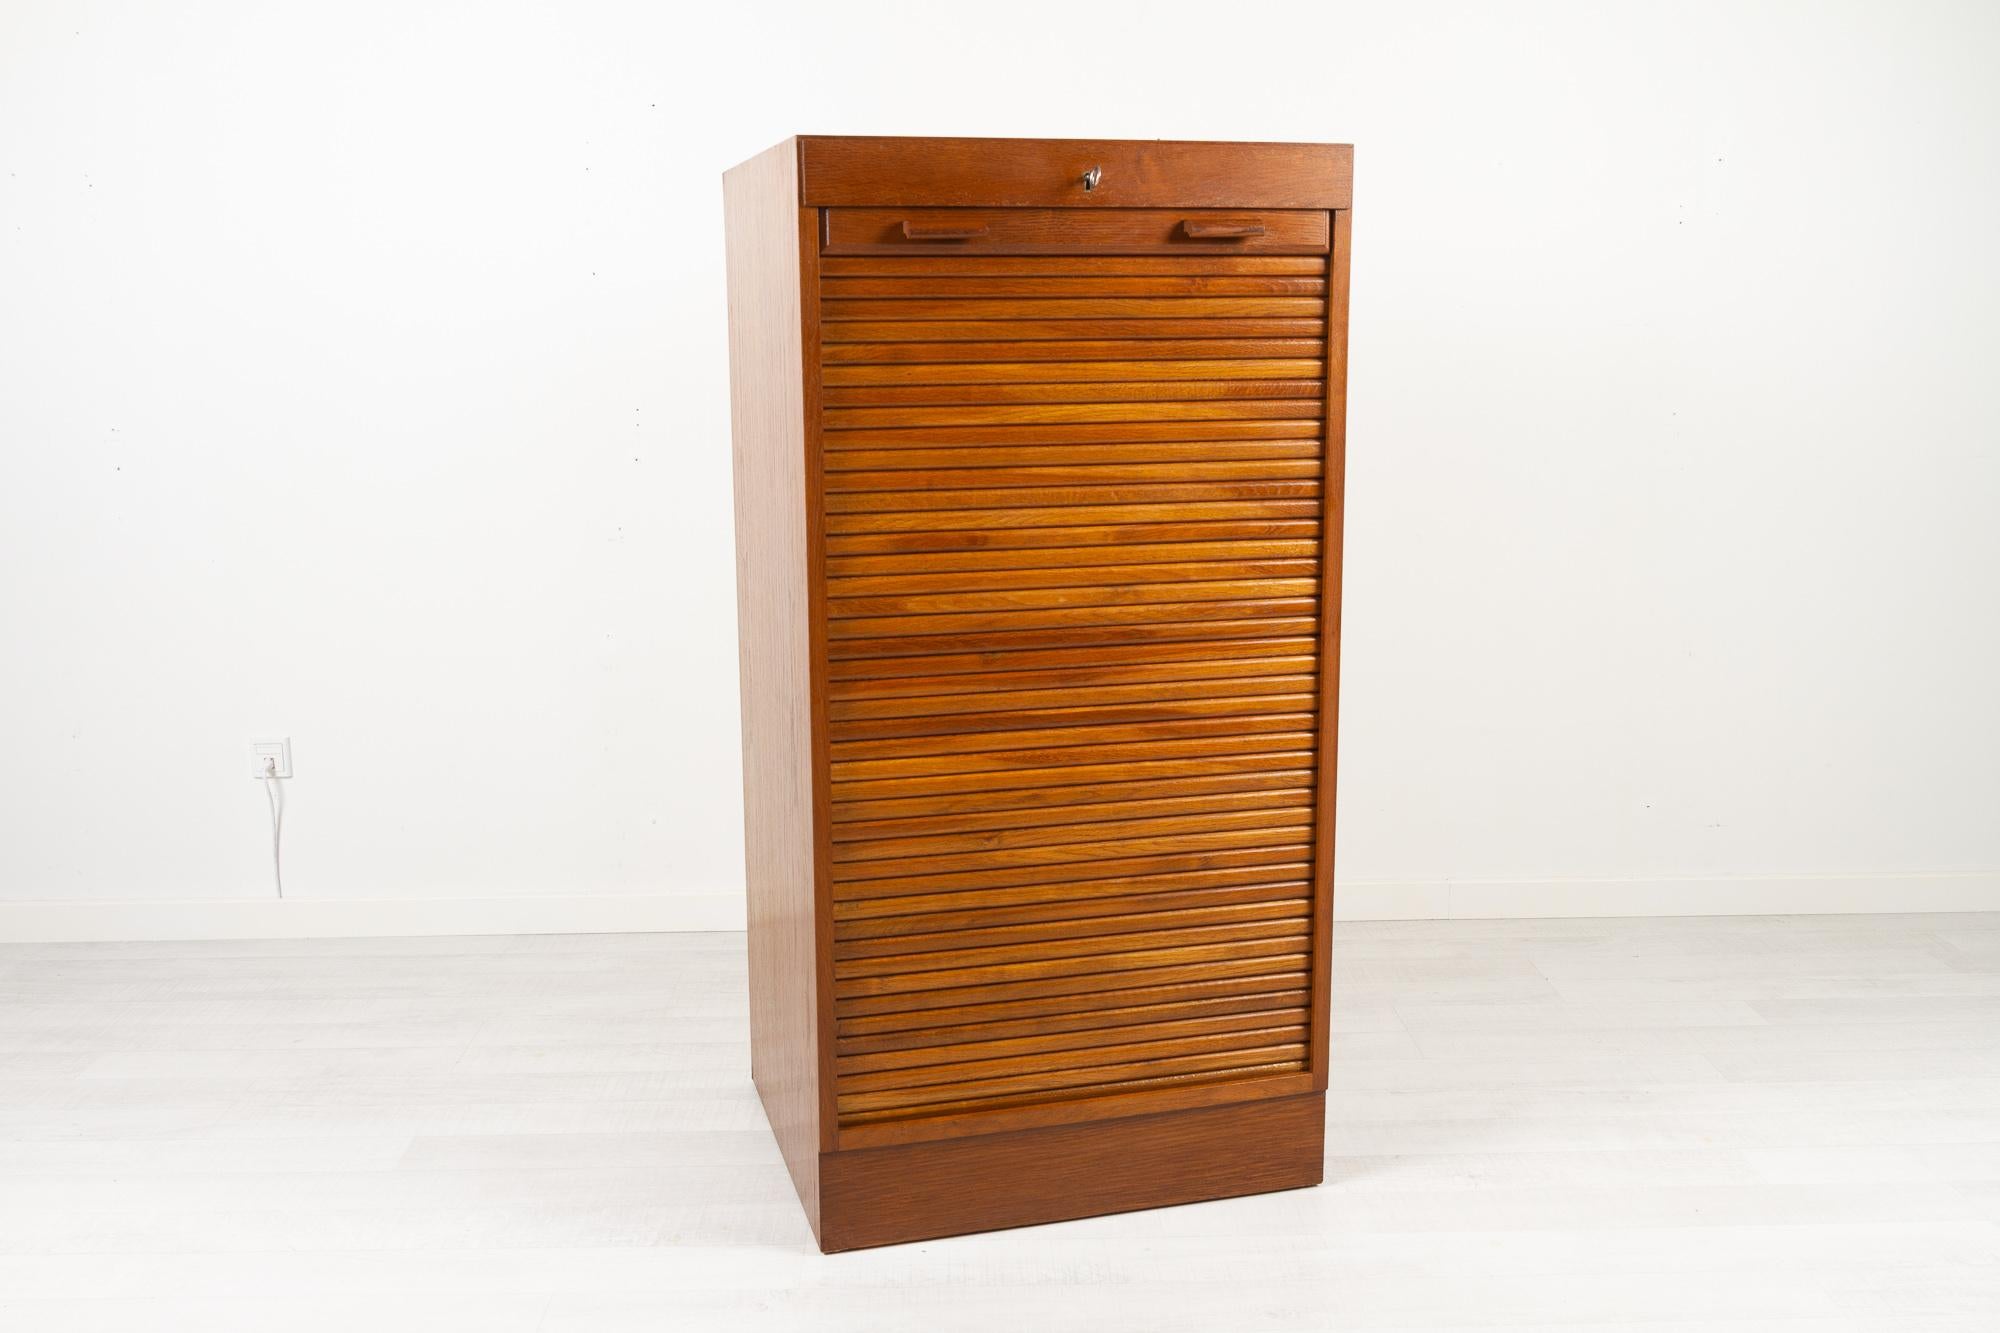 Vintage Danish stained oak cabinet with tambour front, 1960s
Danish modern filing cabinet with vertical sliding tambour door in teak. 10 wide drawers, most with room dividers which can be removed. Rolling door opens with key. Key is included.
Very